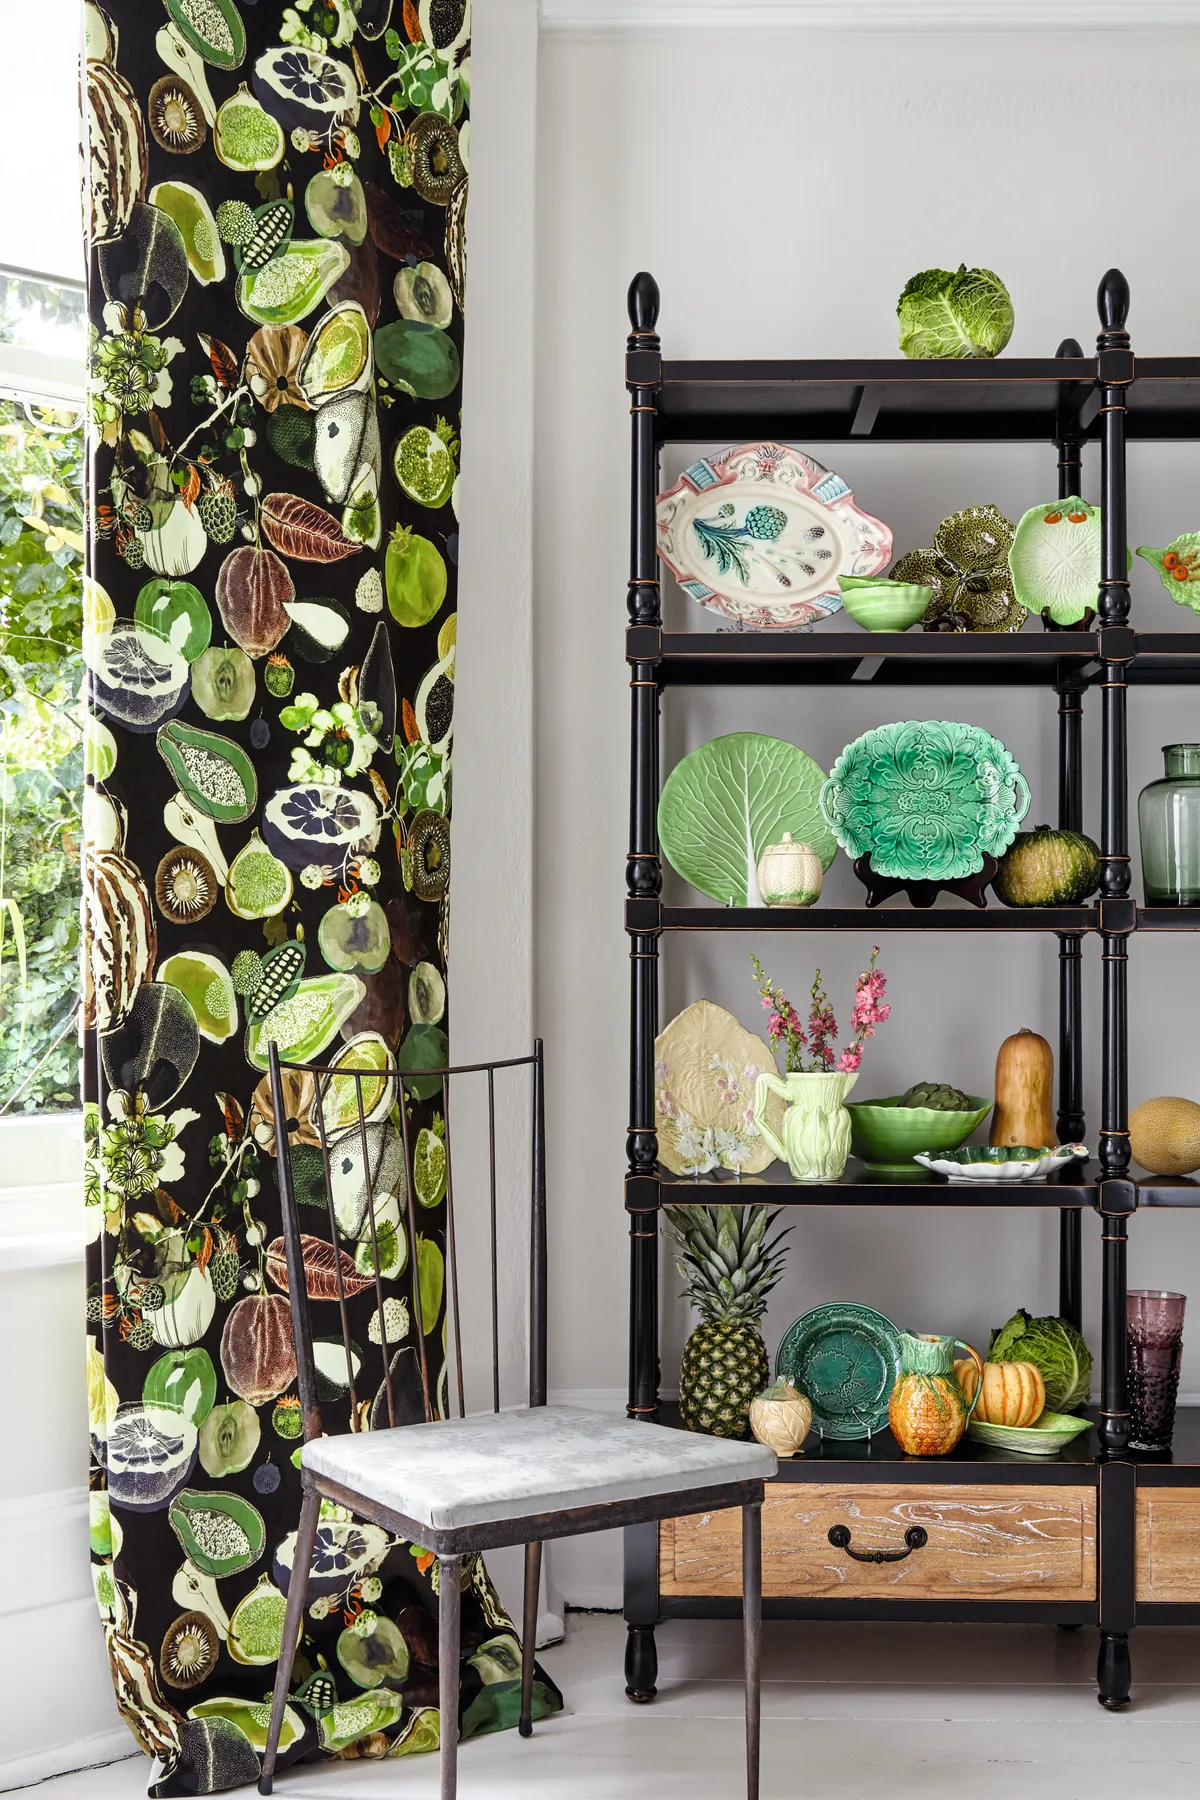 An array of fruit and vegetable plates on open shelving, with vegetable-print curtains to match